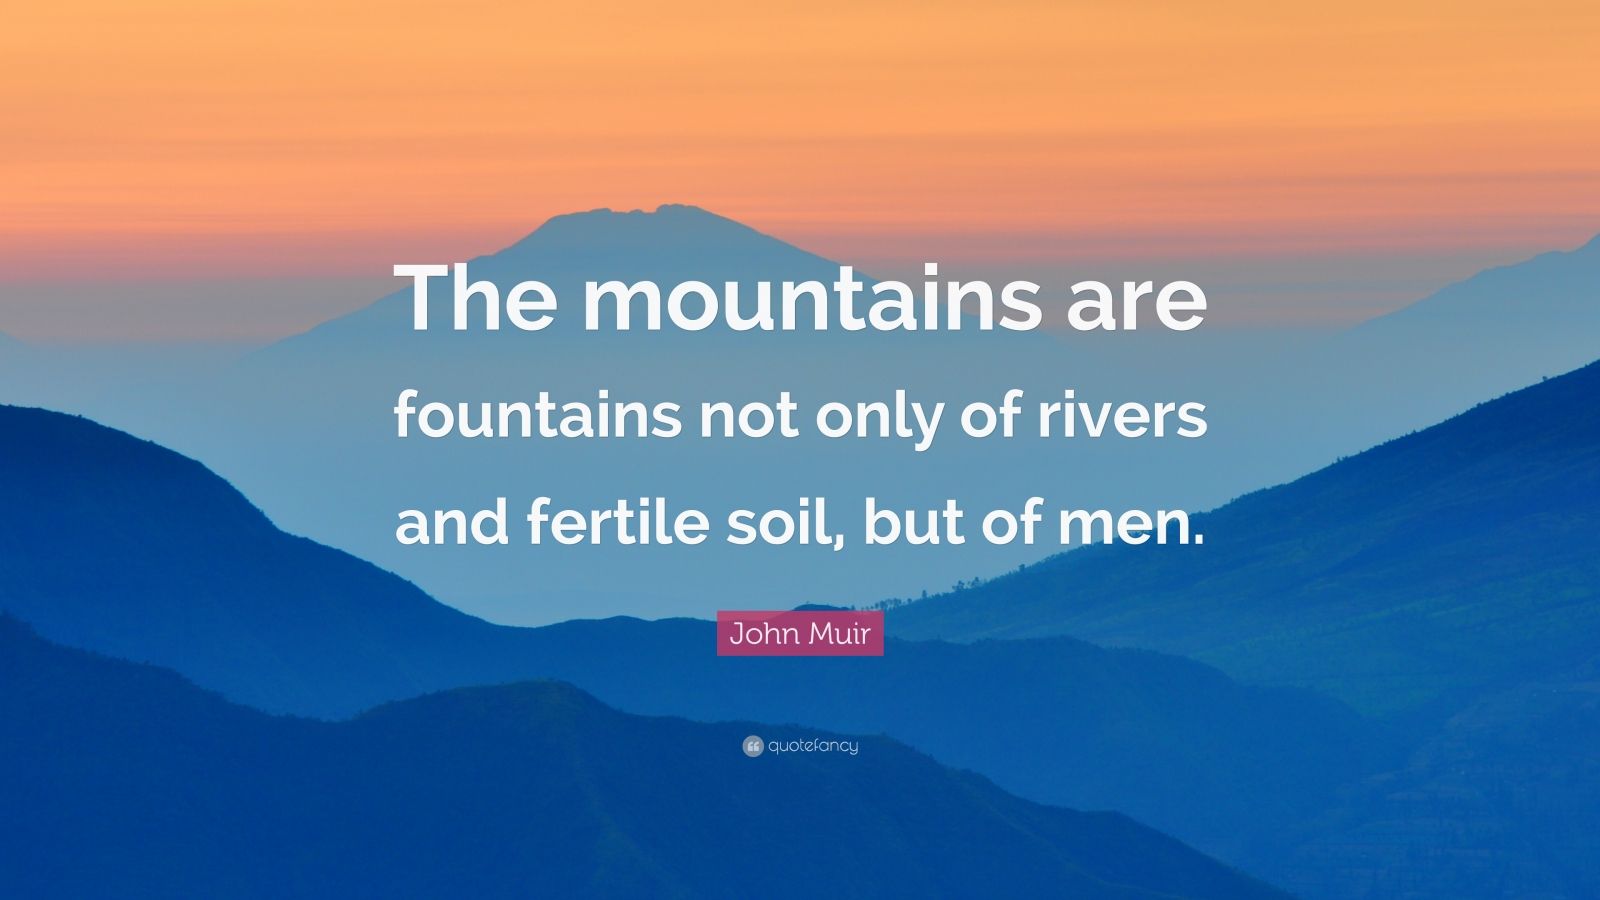 John Muir Quote “The mountains are fountains not only of